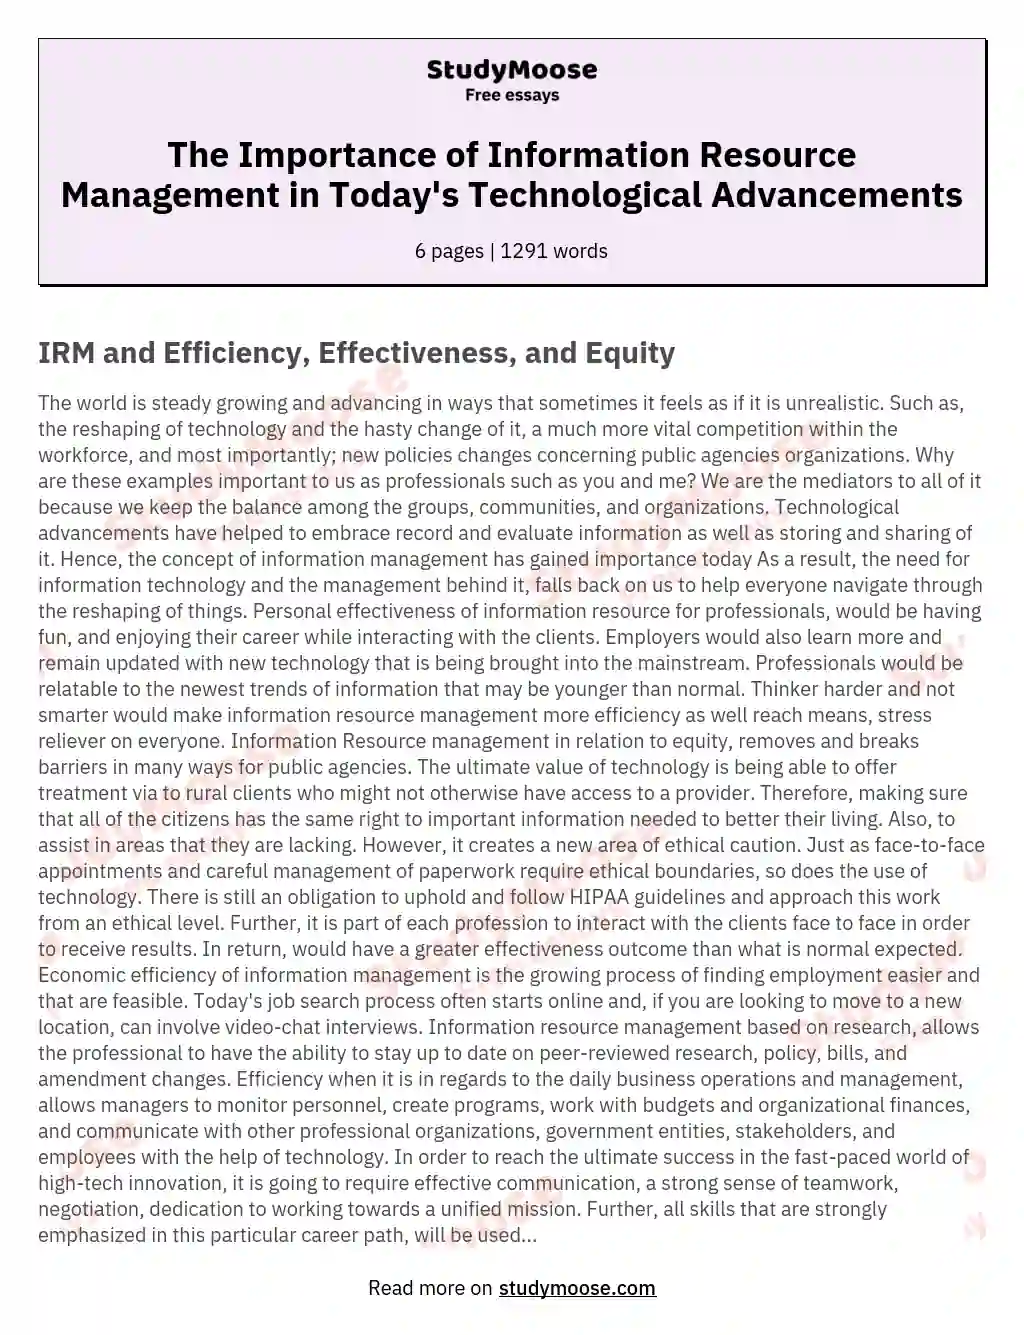 The Importance of Information Resource Management in Today's Technological Advancements essay